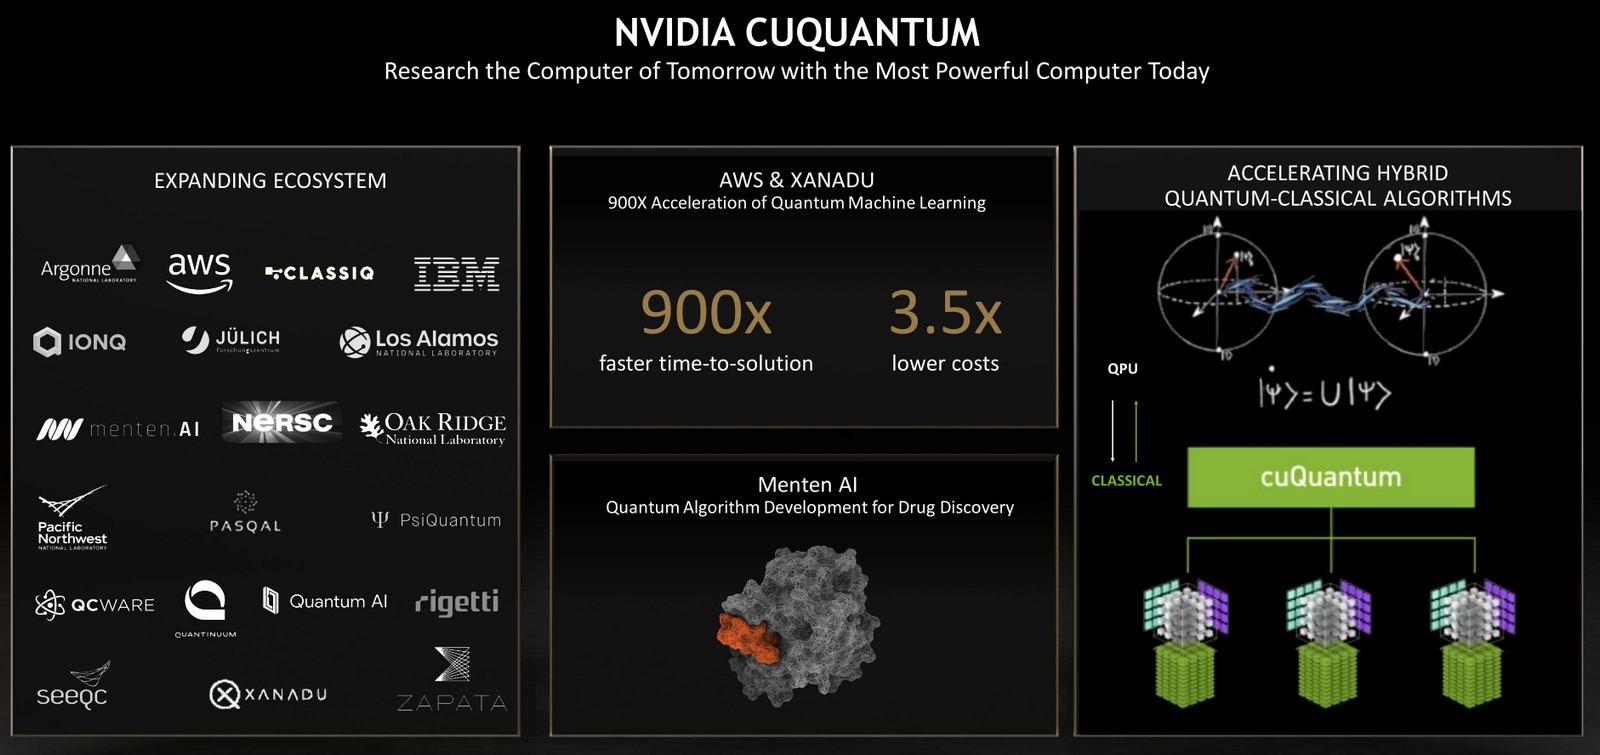 NVIDIA Wants to Combine Classical and Quantum Computers - Need a Fast Interface and Easy Programming Model